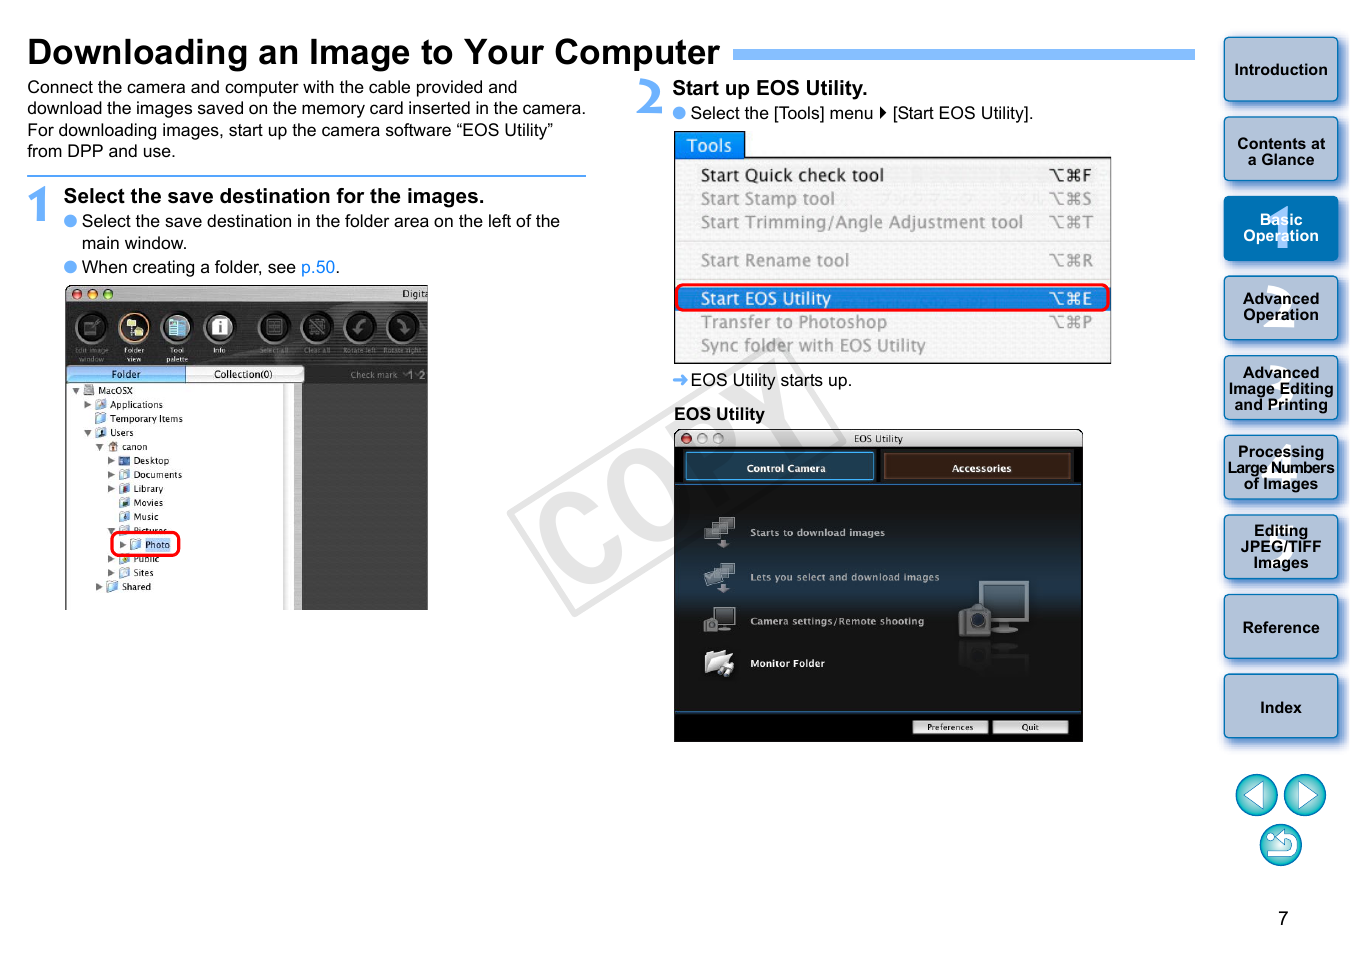 Downloading an image to your computer, Cop y | Canon PowerShot G1 X User Manual | Page 8 / 150